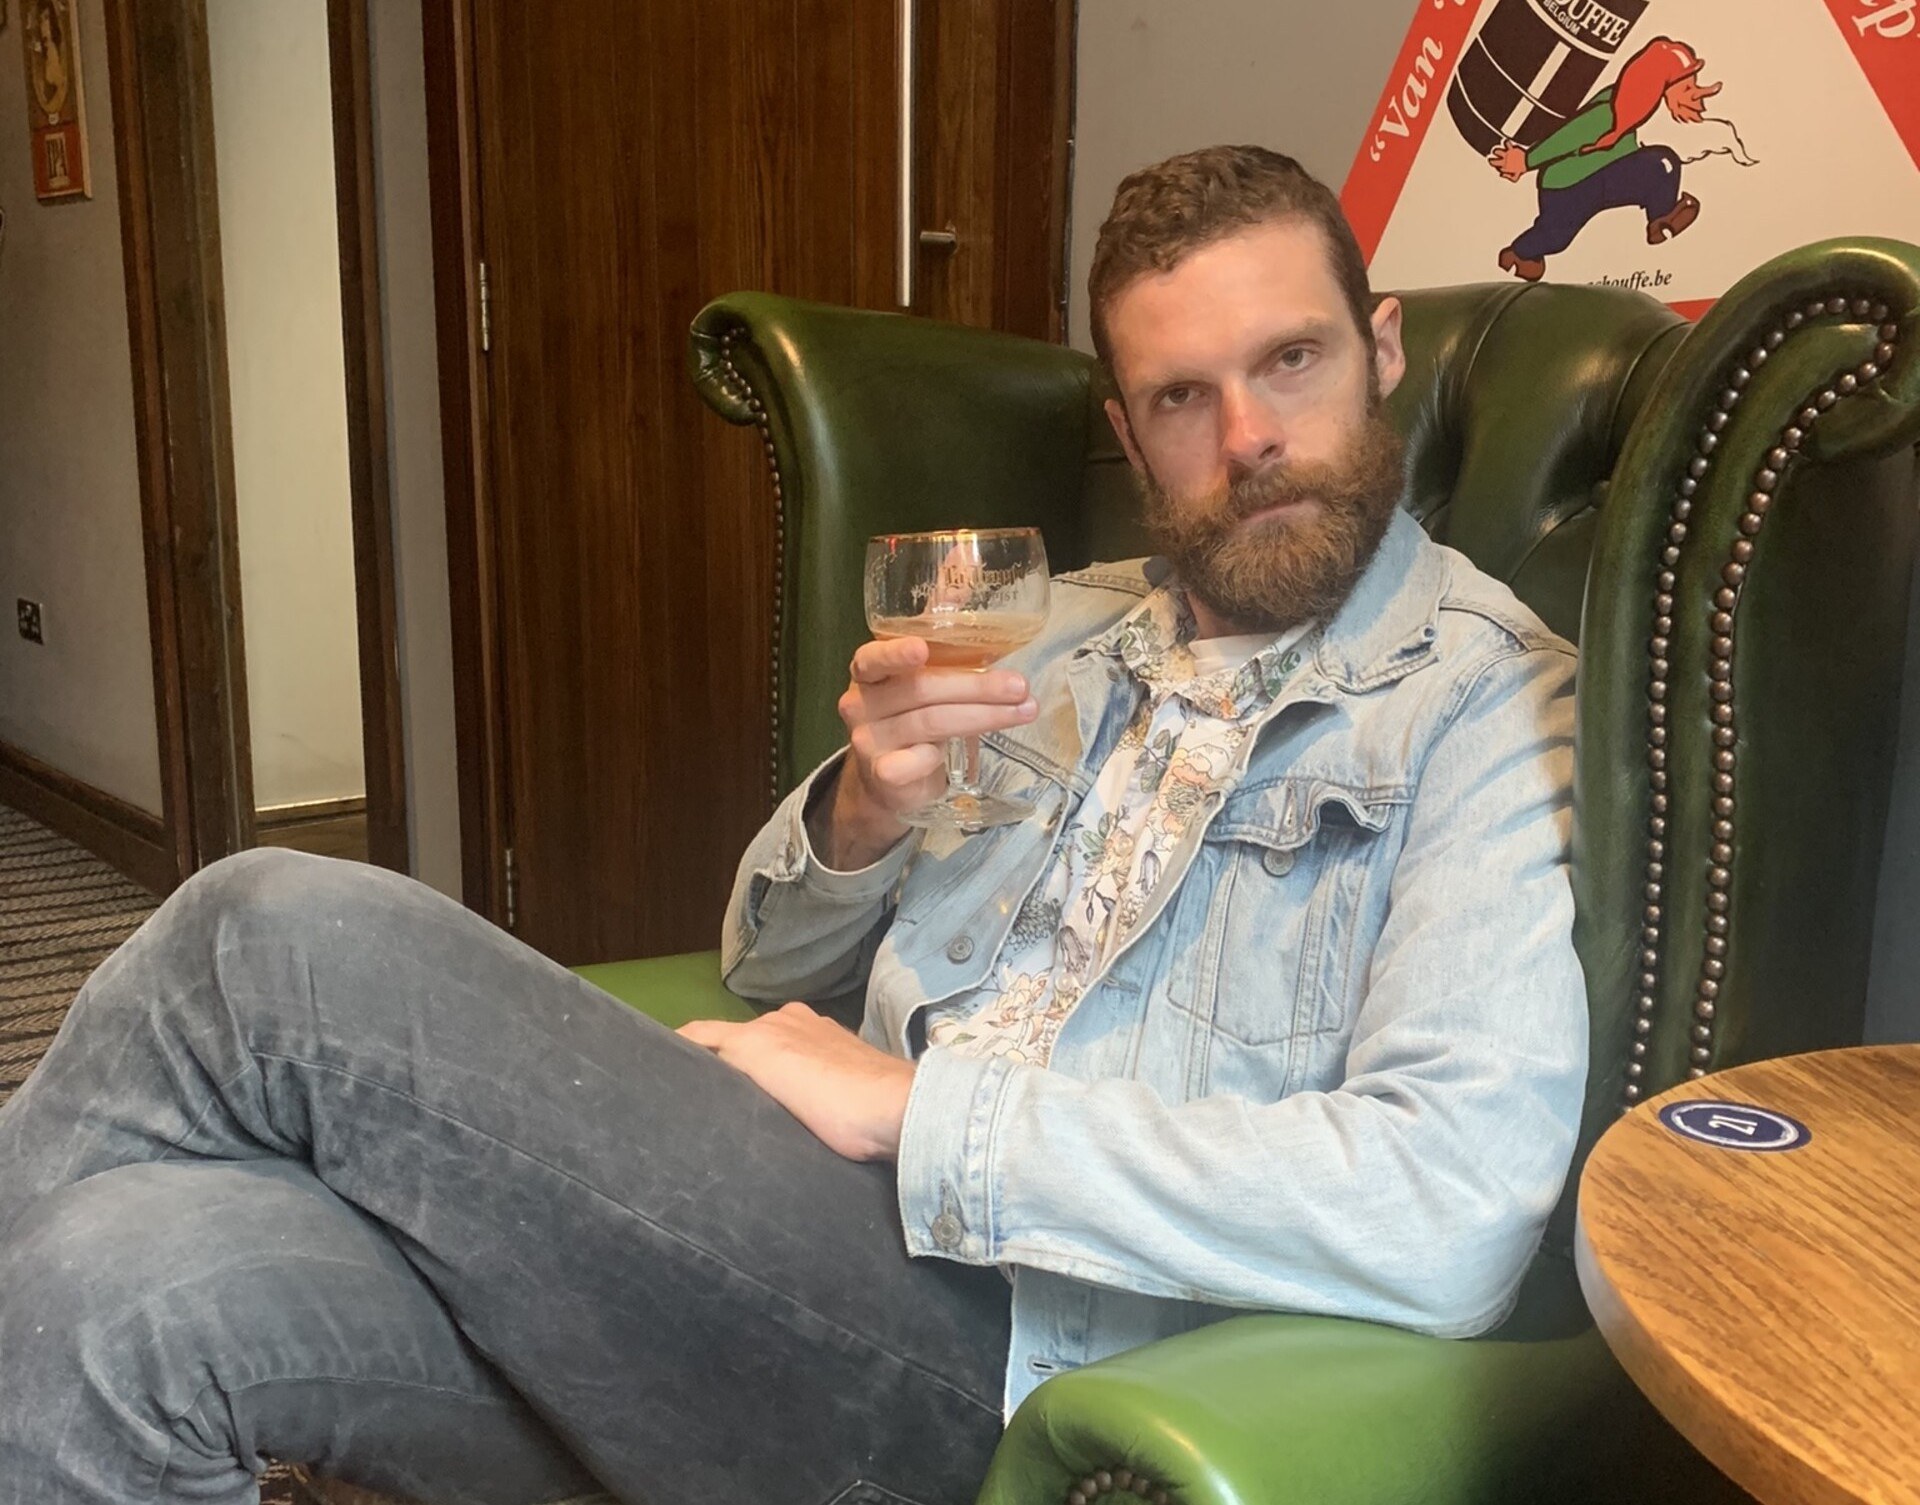 A picture of me with a half-empty coupe of Belgian ale, sitting in a fancy green leather armchair